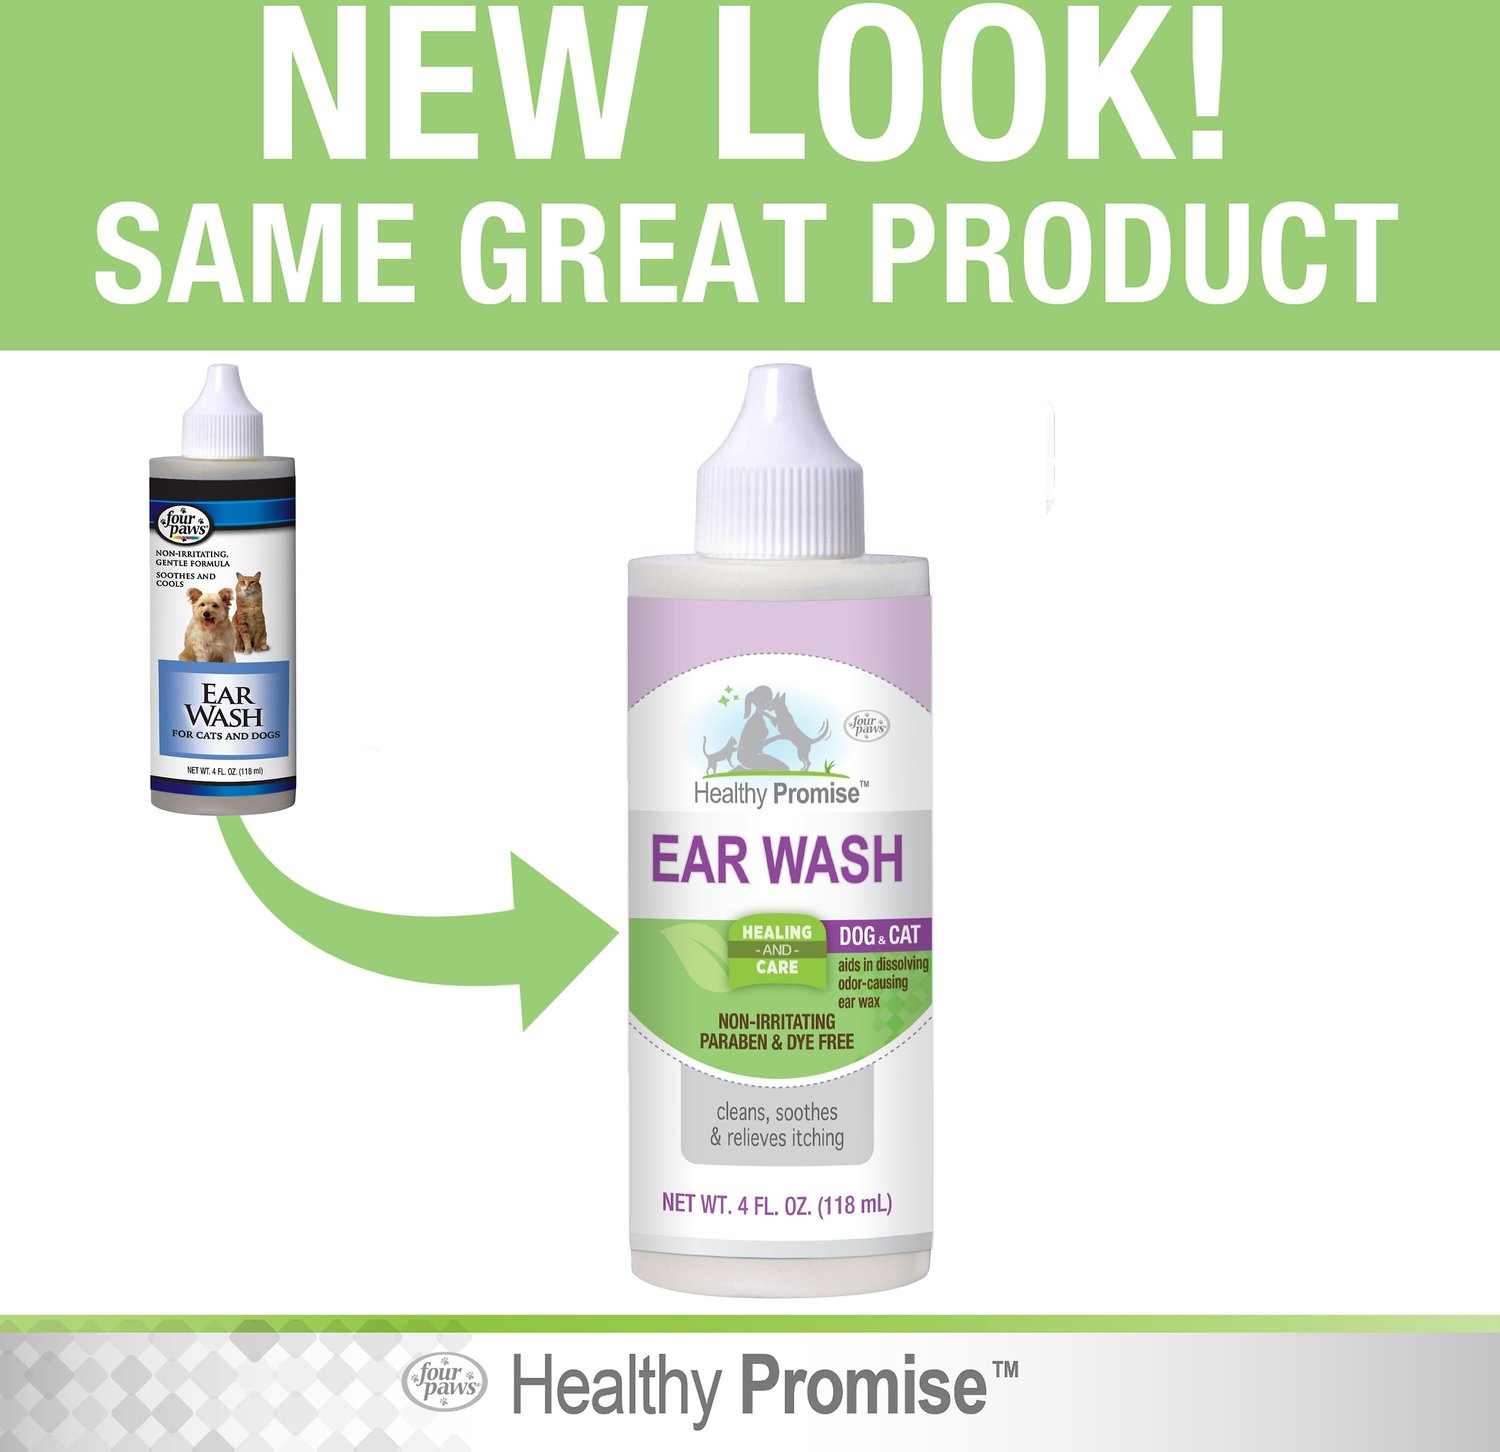 FOUR PAWS Healthy Promise Dog & Cat Ear Wash, 4-oz bottle - Chewy.com